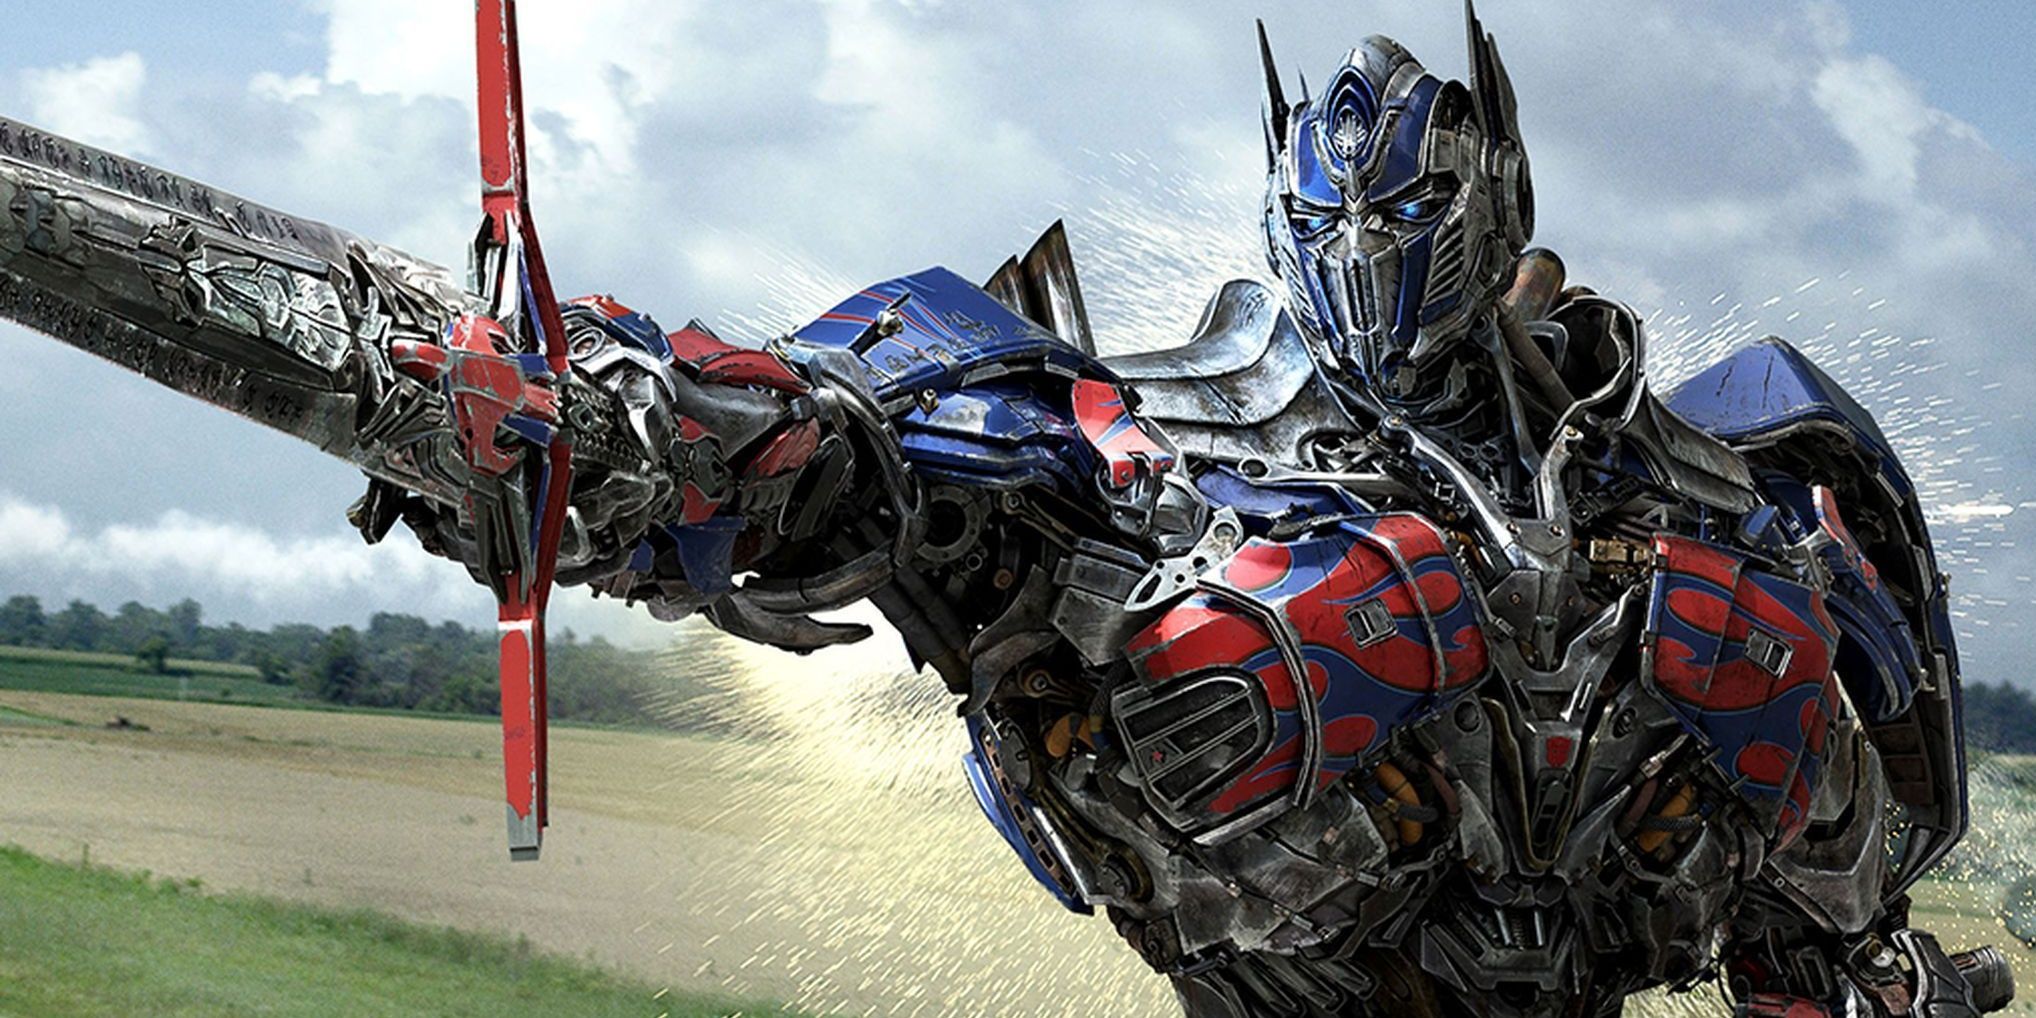 Optimus Prime holding up a robotic sword in Transformers